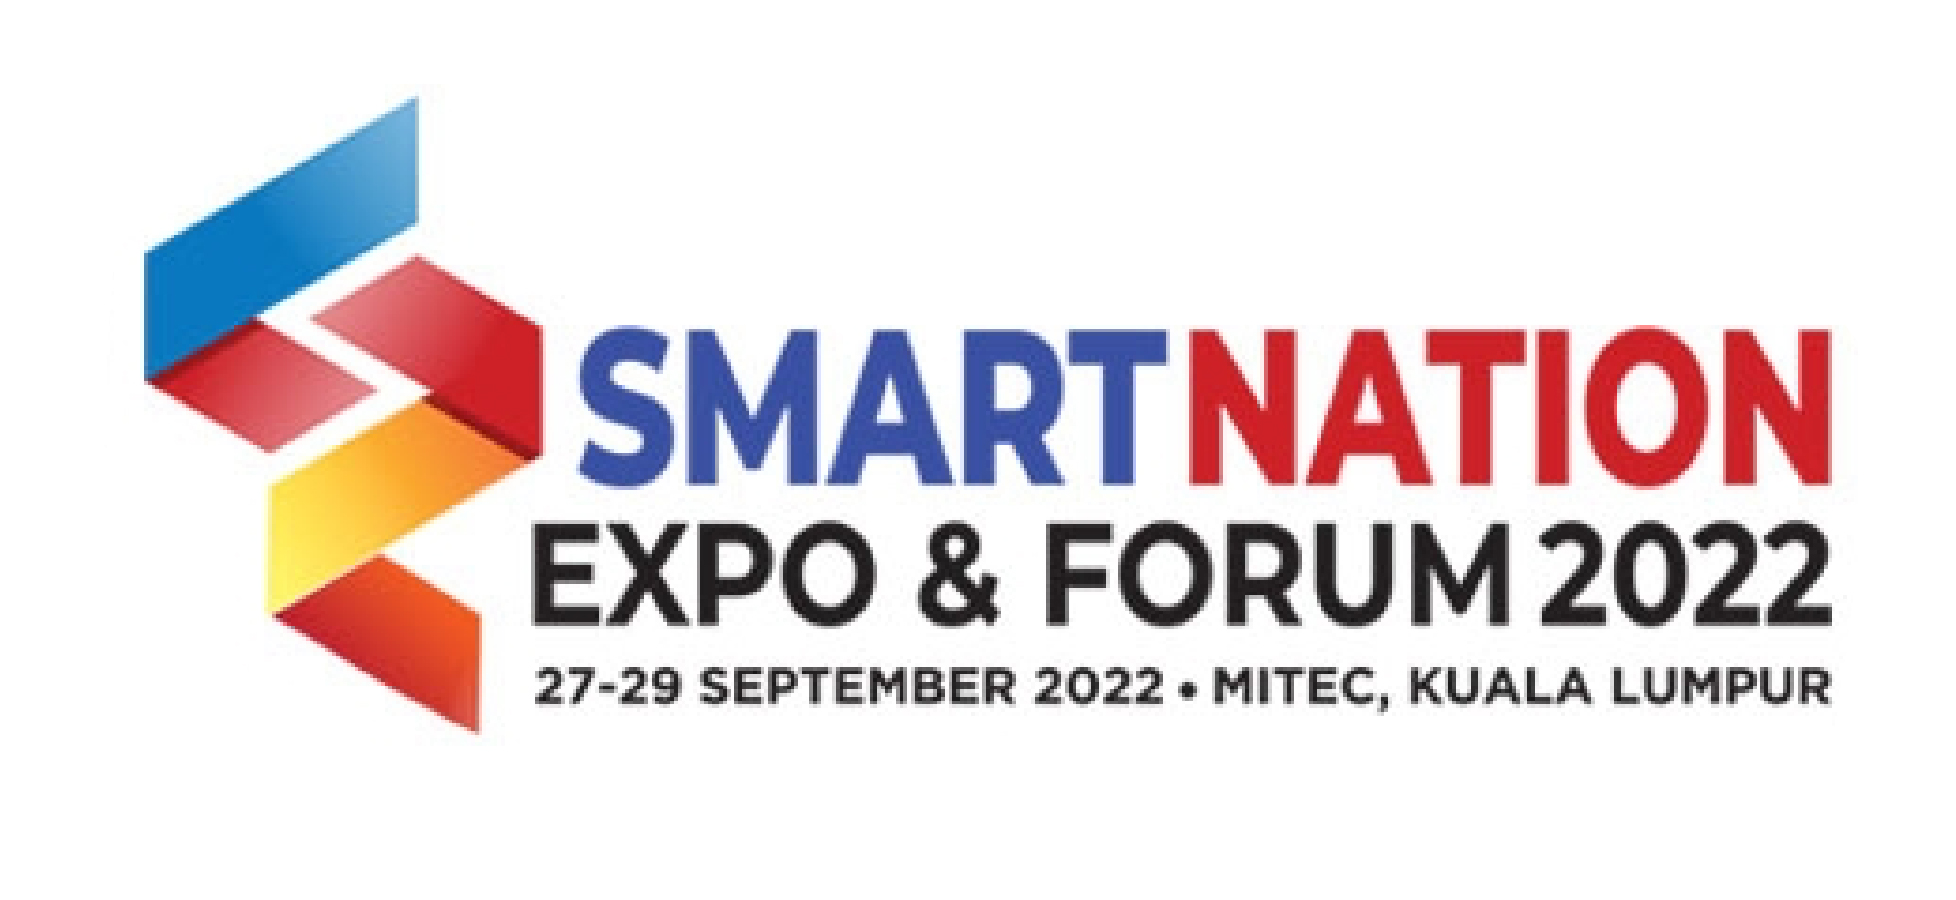 Smart Nation Expo & Forum 2022